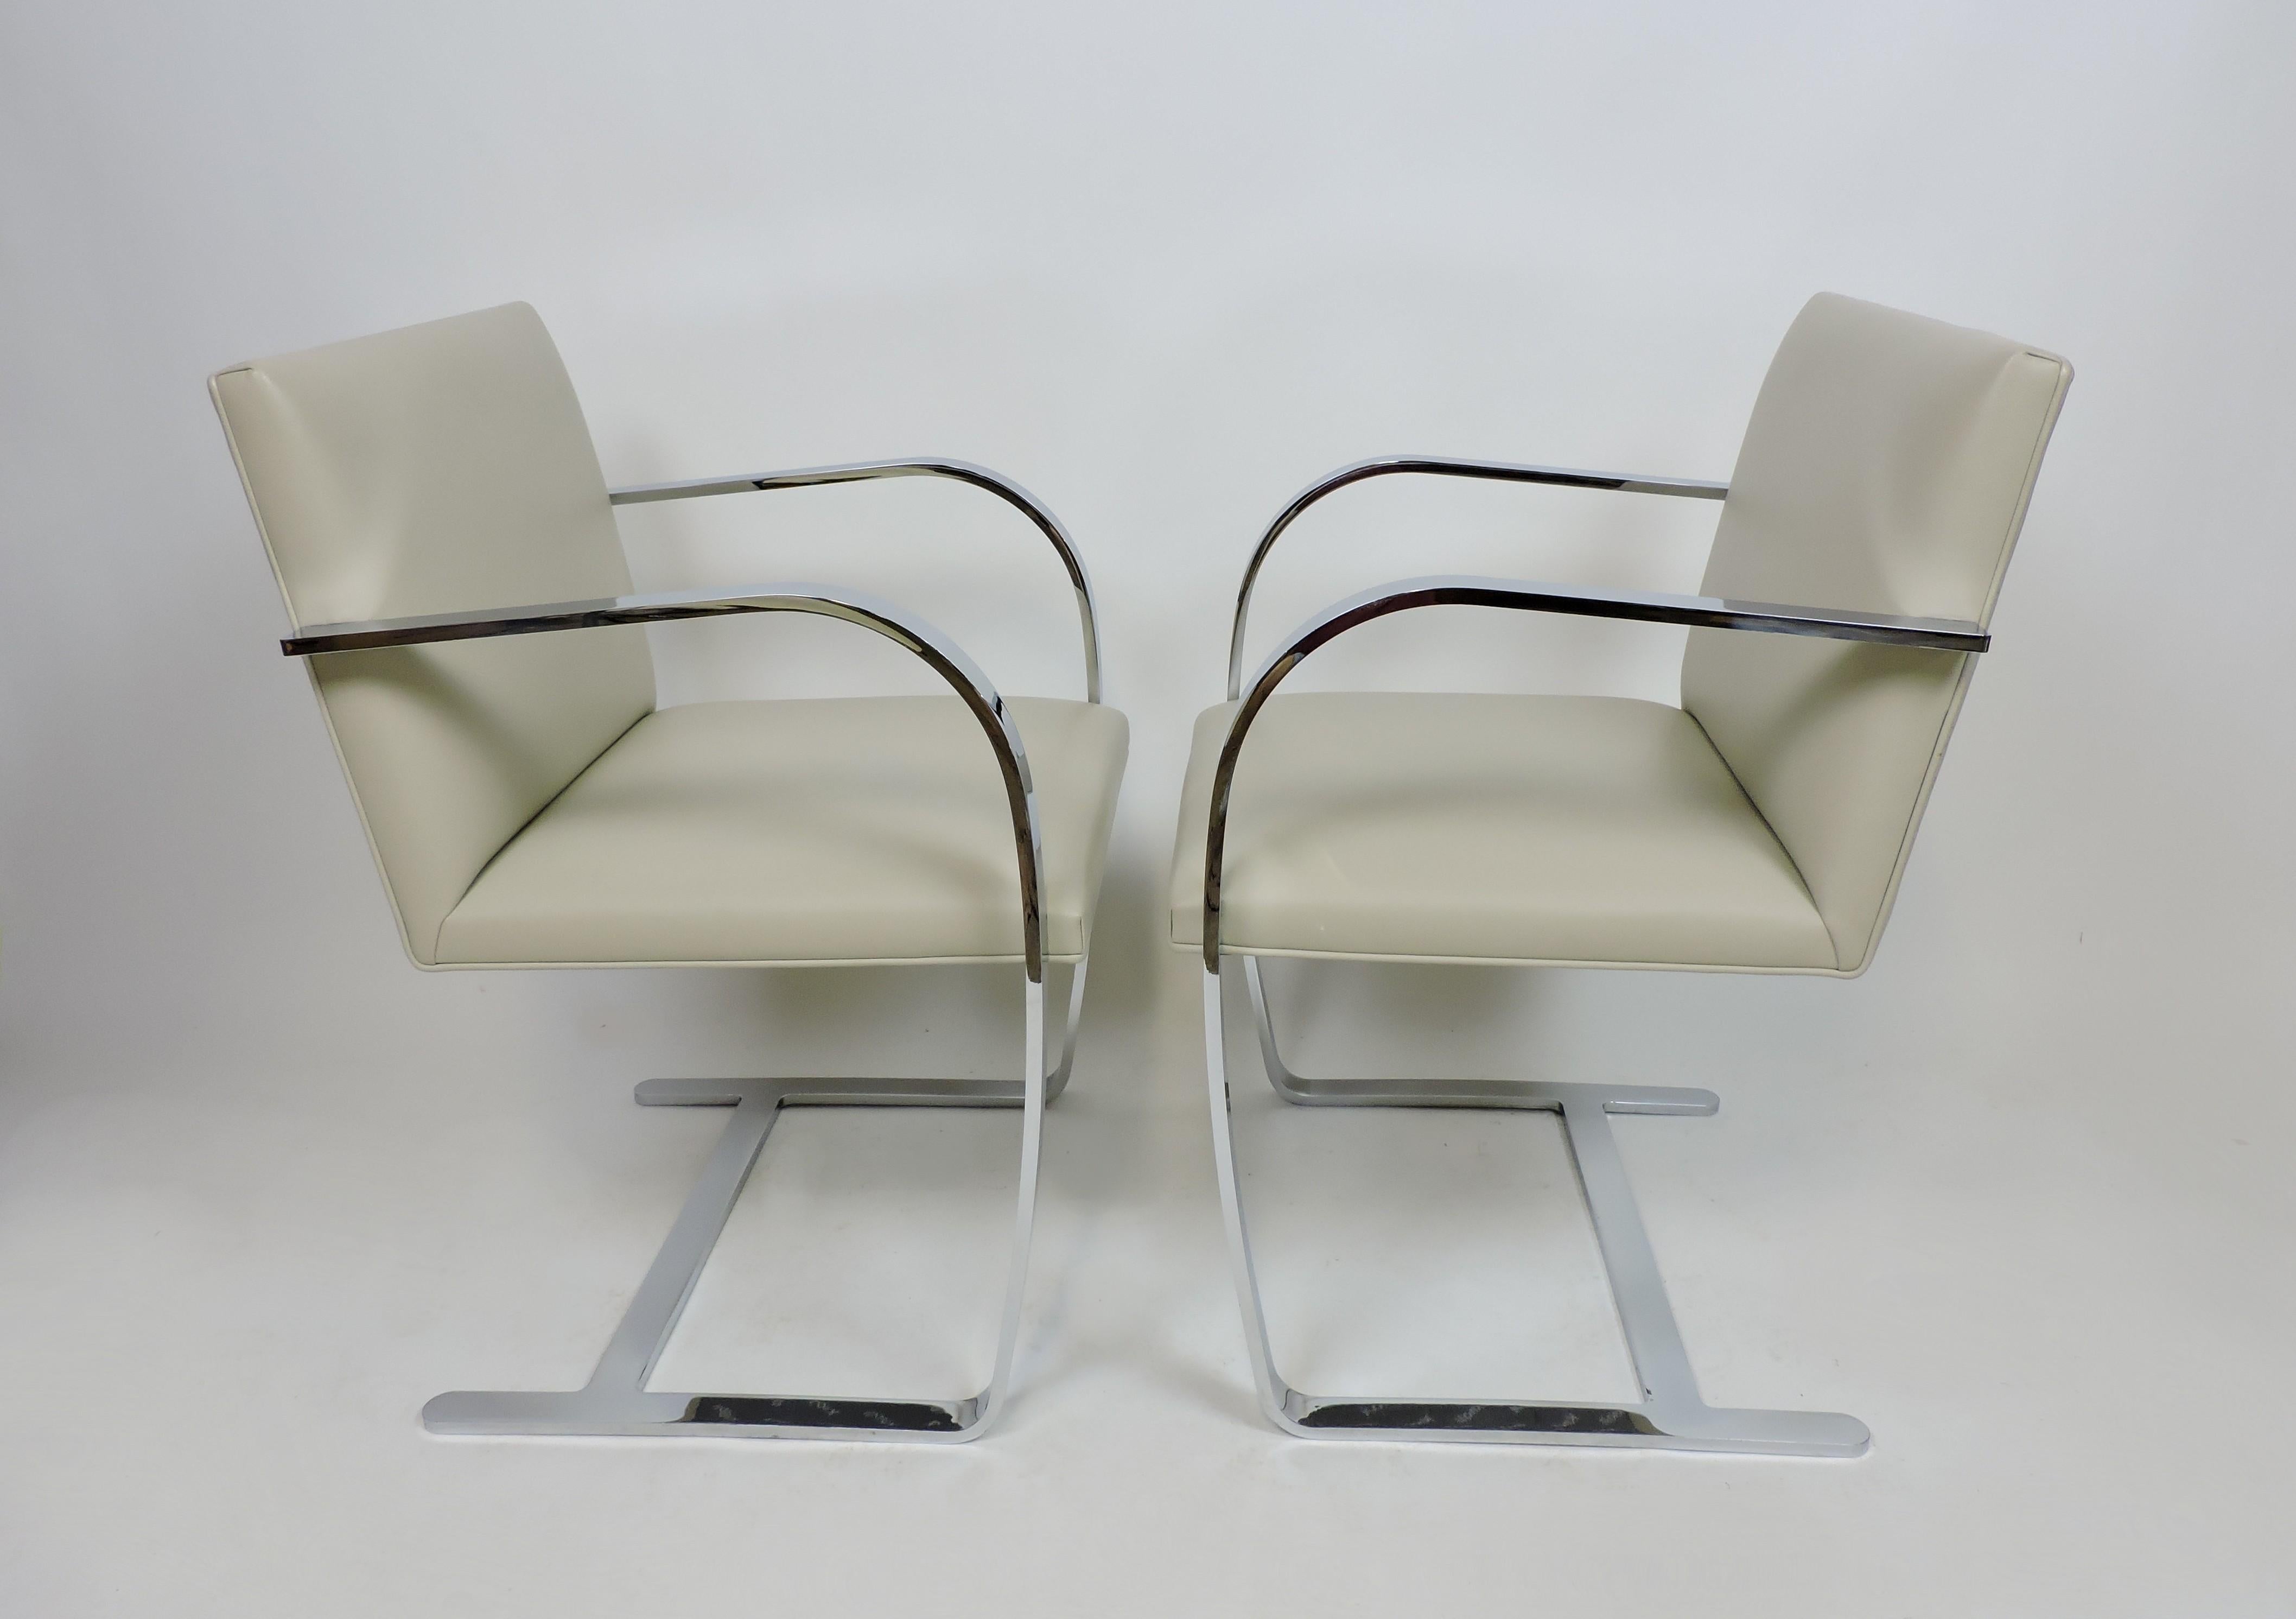 American Set of Six Mies van der Rohe for Knoll Brno Flat Bar Chrome and Leather Chairs 